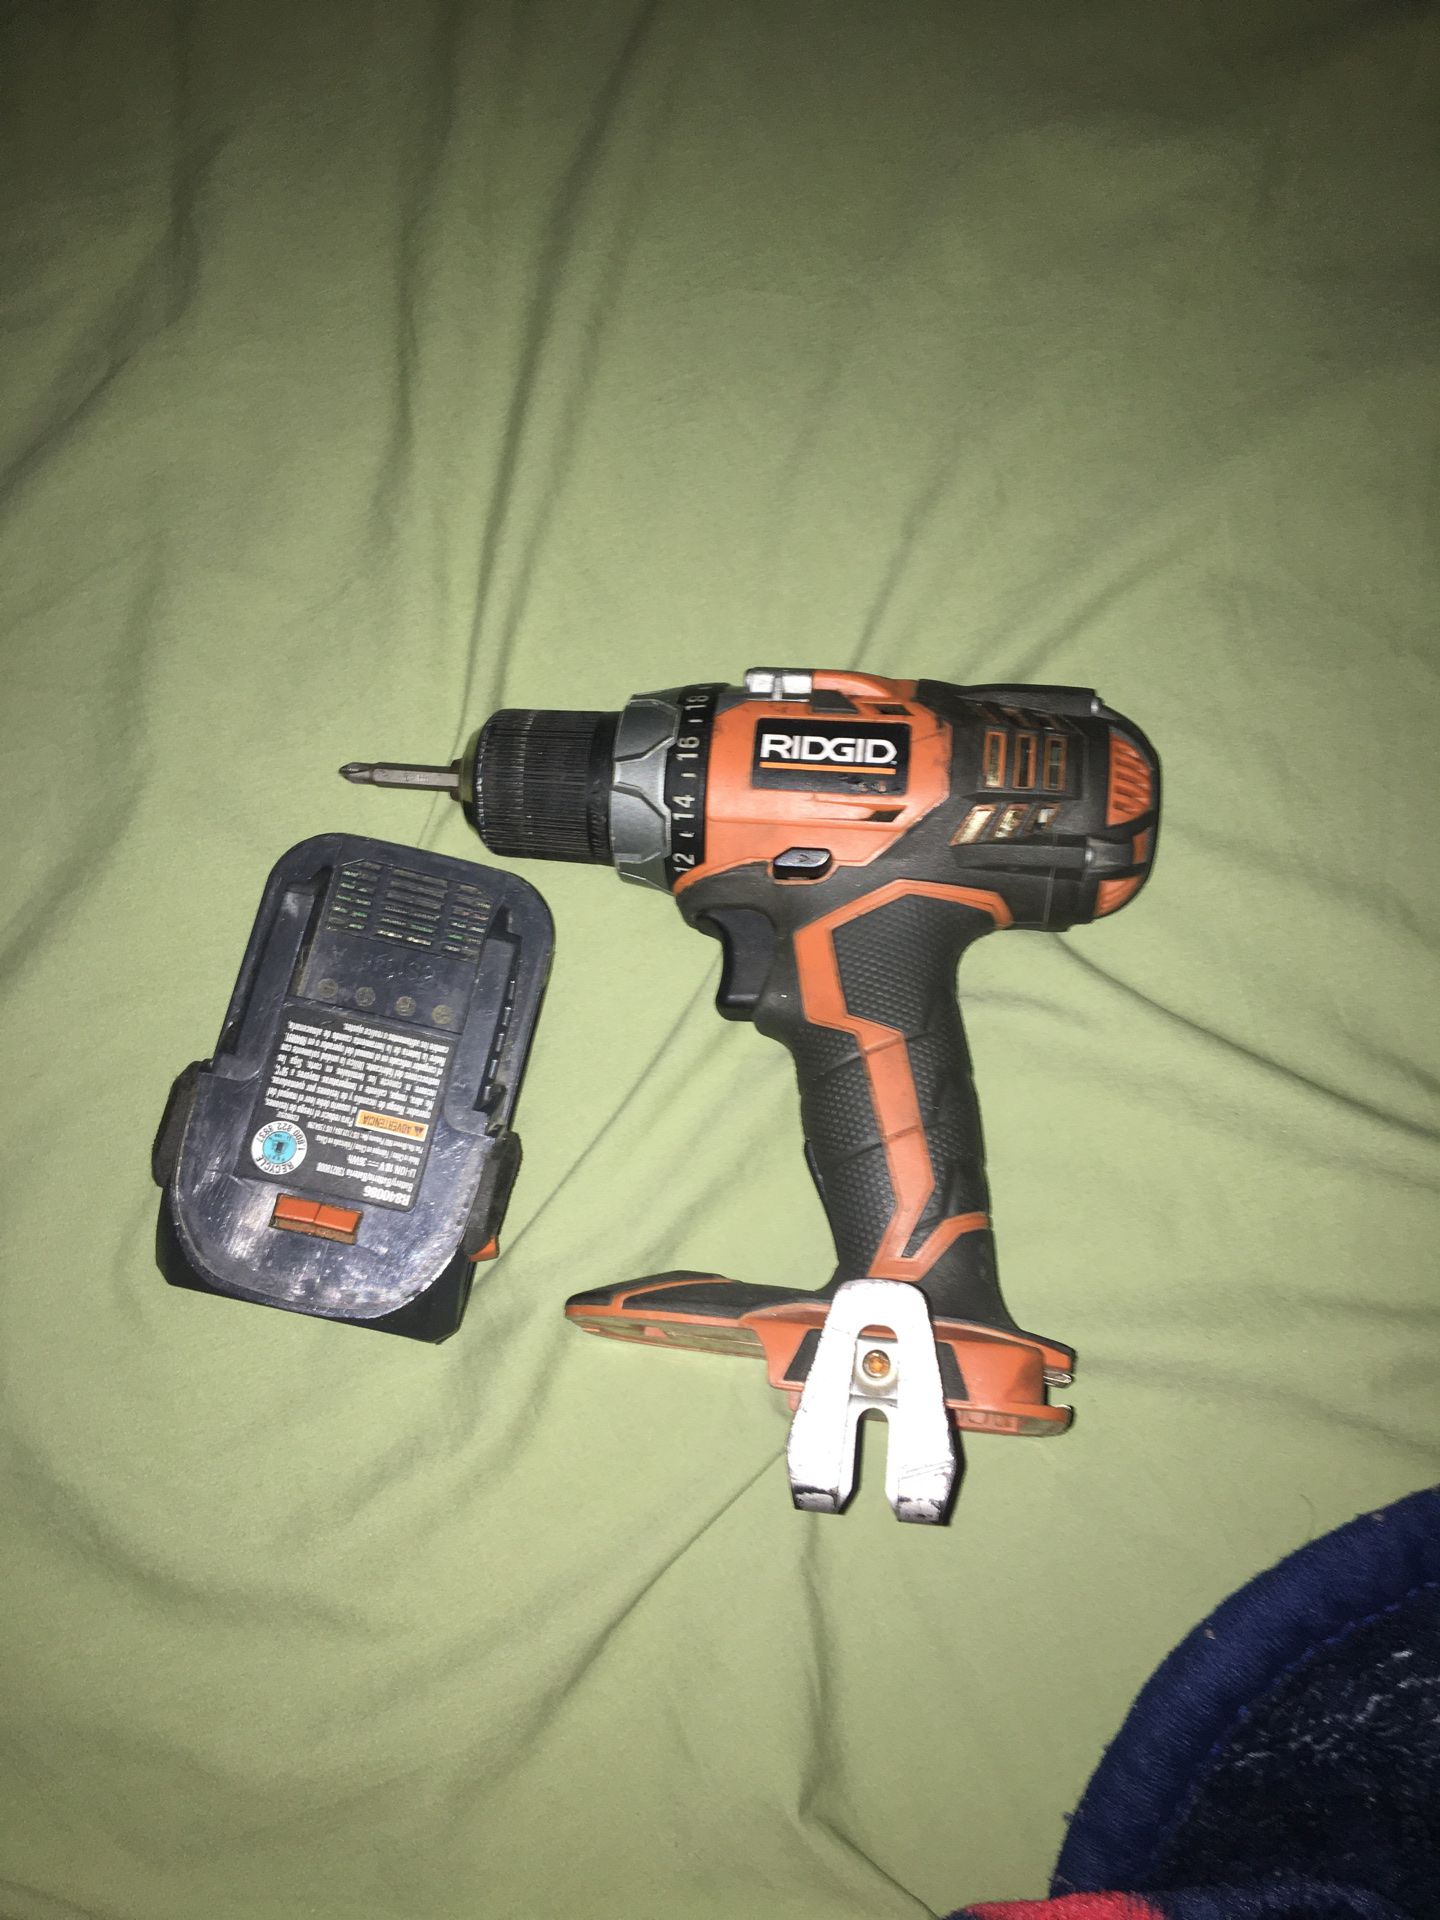 Rigid drill set with charger and battery